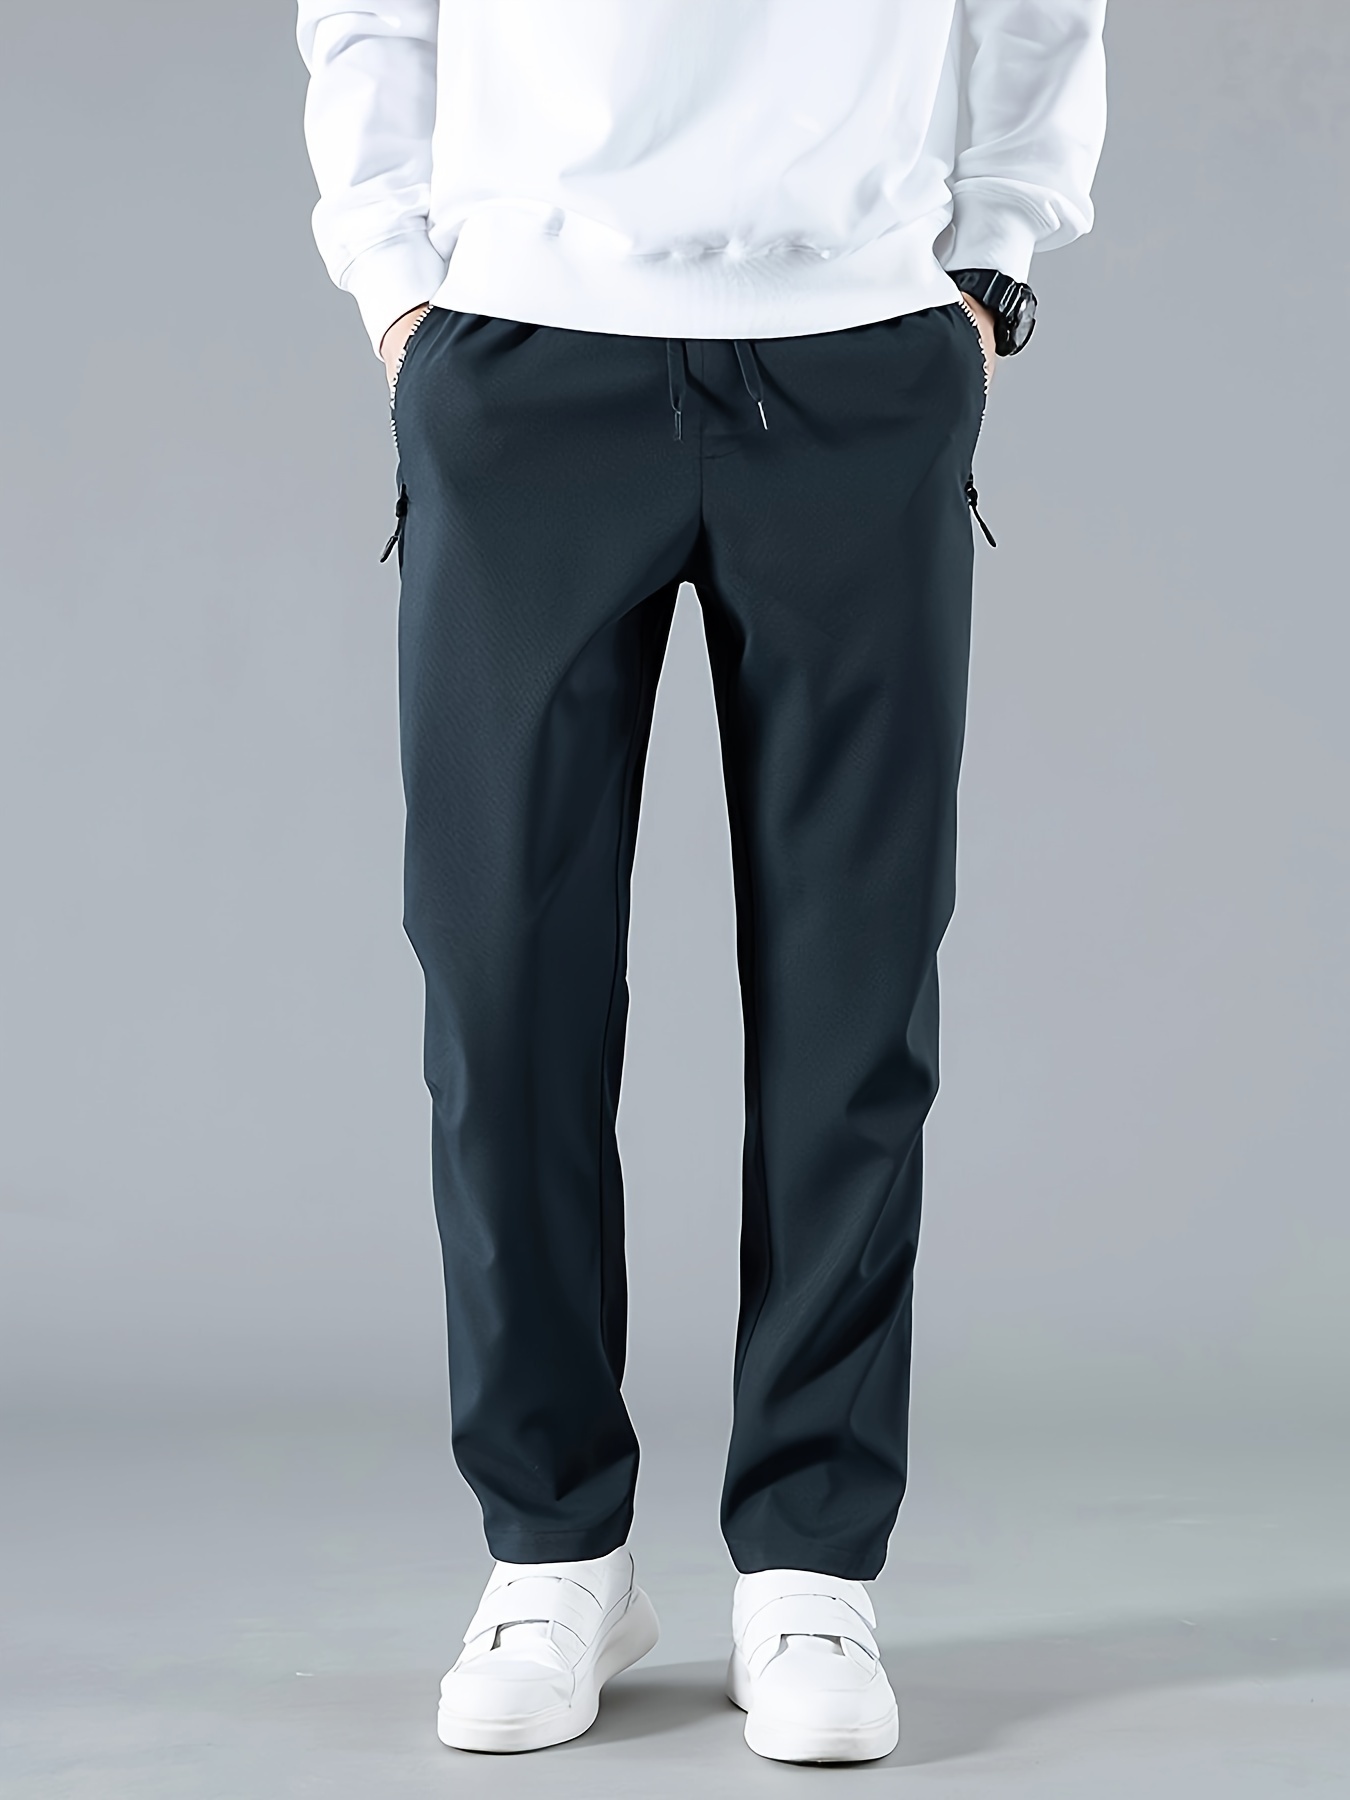 Solid Sweat Pants - Classic Regular Fit, Cuffed Hem, Straight Leg, Adjustable Drawstring Waistband, Zippered Pockets - Perfect for Casual, Chic, Sports, and All Seasons Wear